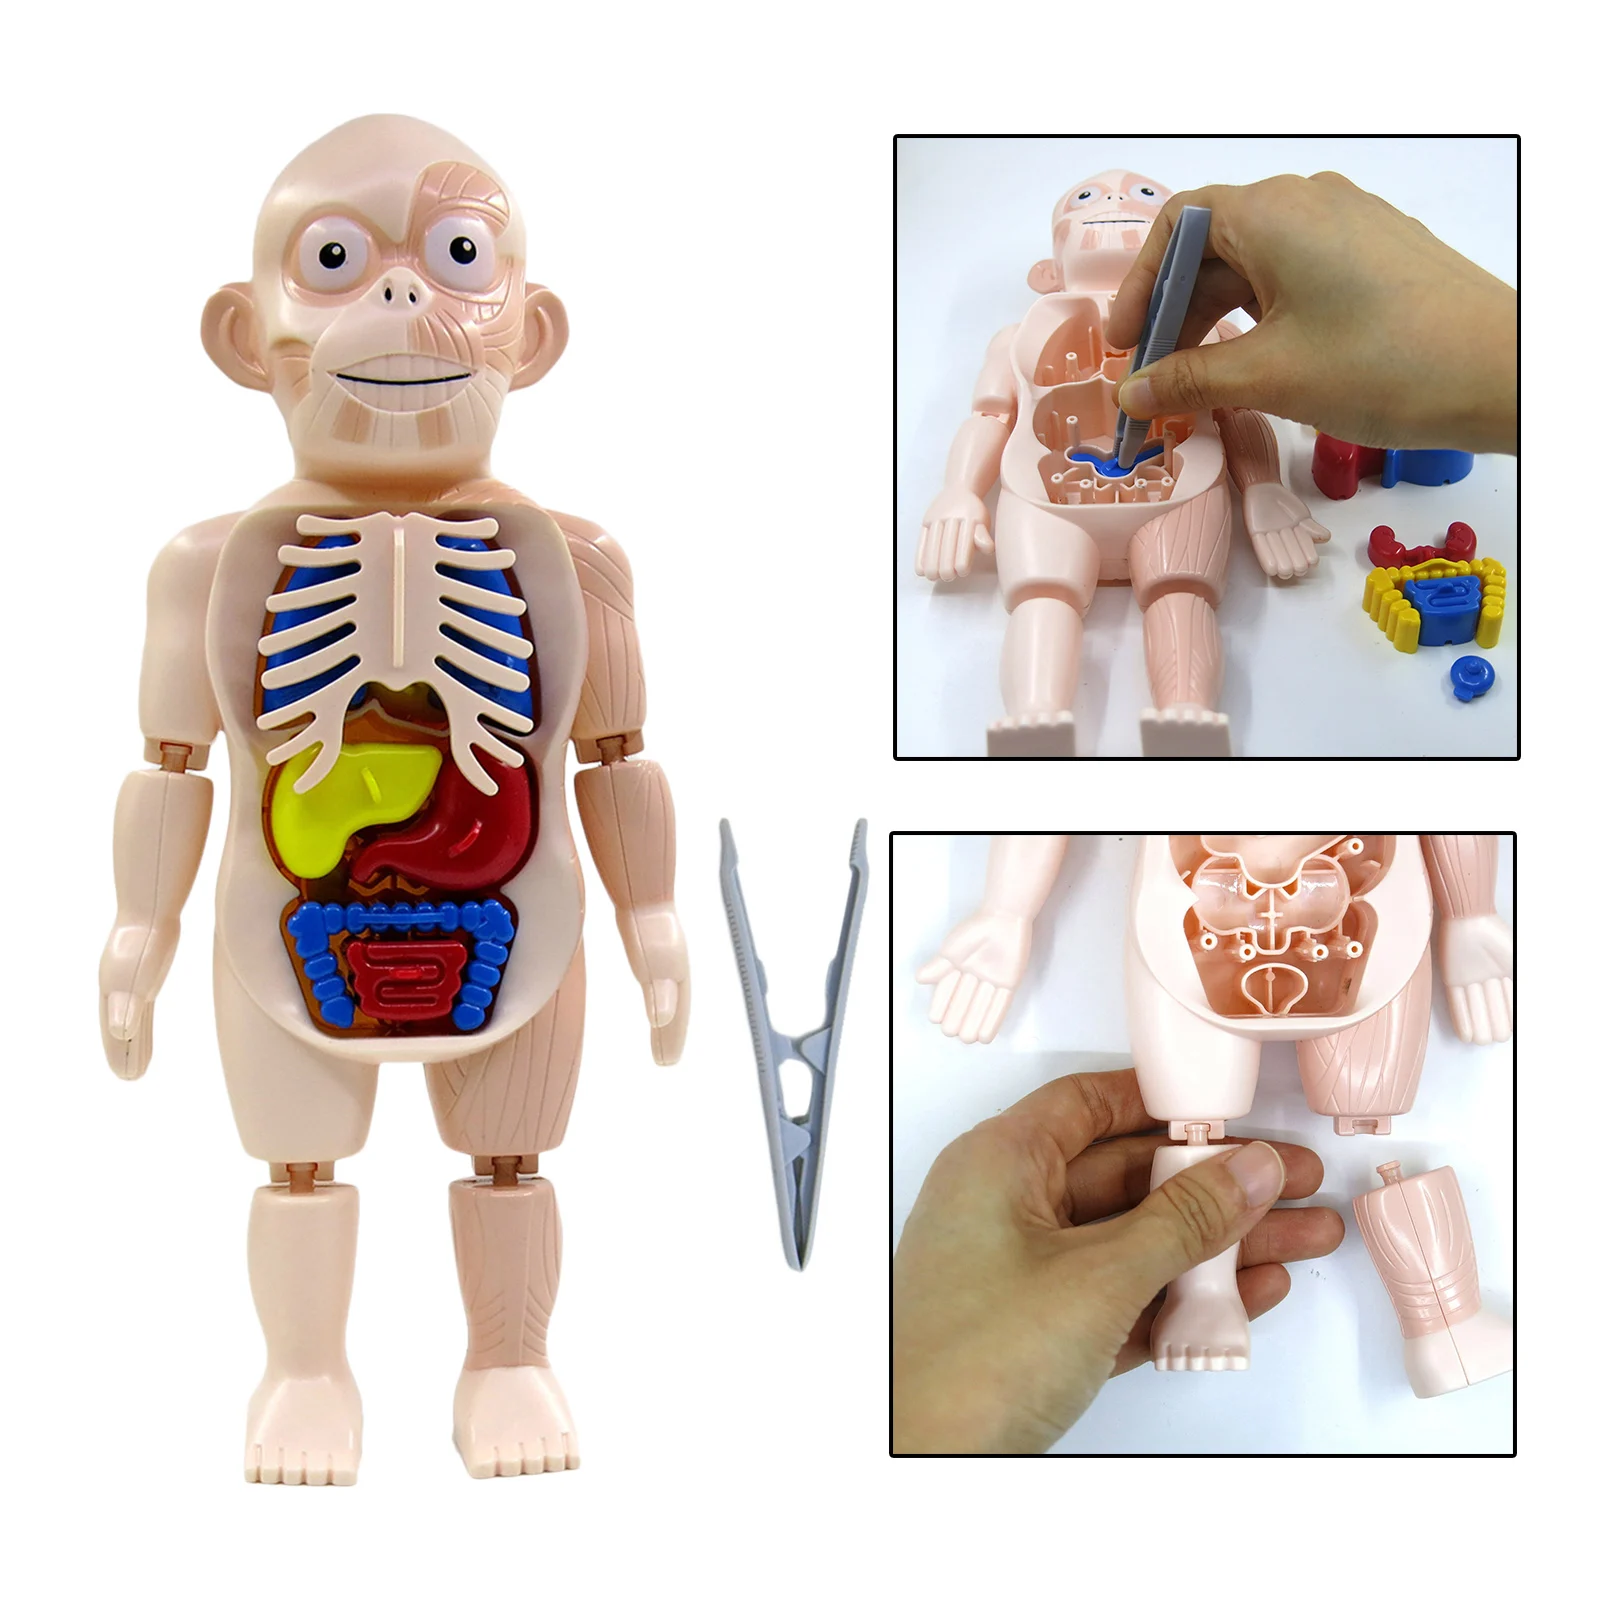 3D Human Body w/ Organs Anatomy Educational DIY Toys for Children Demonstration Teaching Tools Scary Game